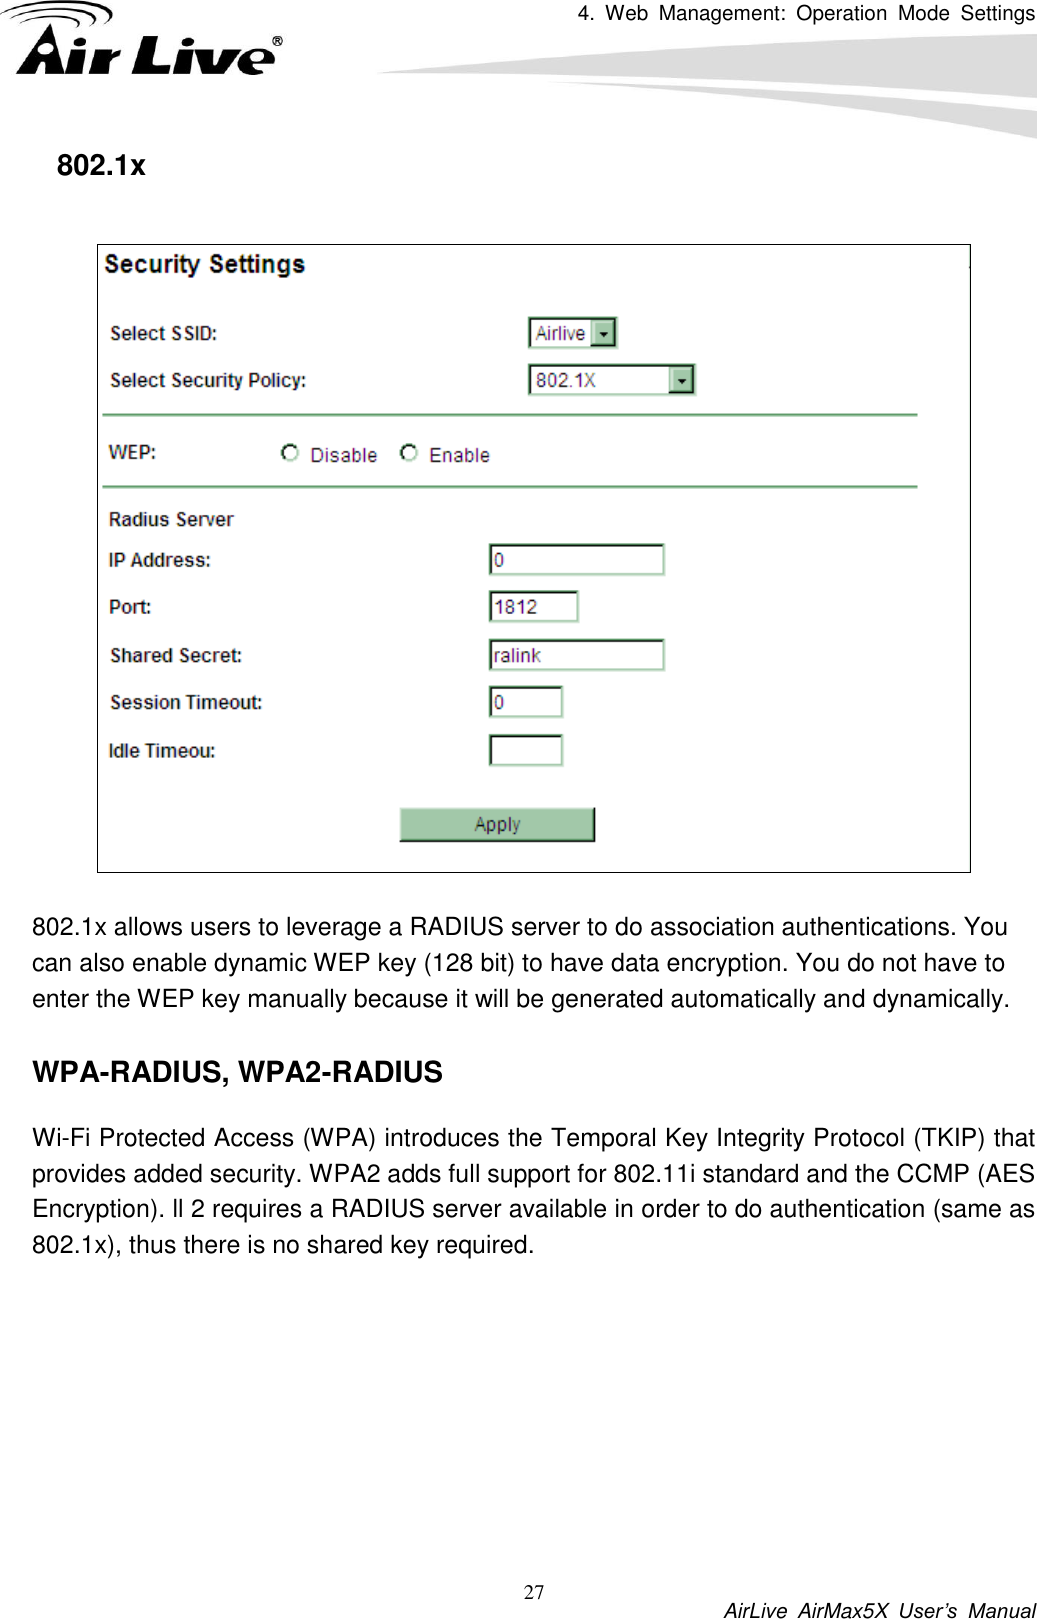 4.  Web  Management:  Operation  Mode  Settings           AirLive  AirMax5X  User’s  Manual 27 802.1x    802.1x allows users to leverage a RADIUS server to do association authentications. You can also enable dynamic WEP key (128 bit) to have data encryption. You do not have to enter the WEP key manually because it will be generated automatically and dynamically.    WPA-RADIUS, WPA2-RADIUS Wi-Fi Protected Access (WPA) introduces the Temporal Key Integrity Protocol (TKIP) that provides added security. WPA2 adds full support for 802.11i standard and the CCMP (AES Encryption). ll 2 requires a RADIUS server available in order to do authentication (same as 802.1x), thus there is no shared key required.    